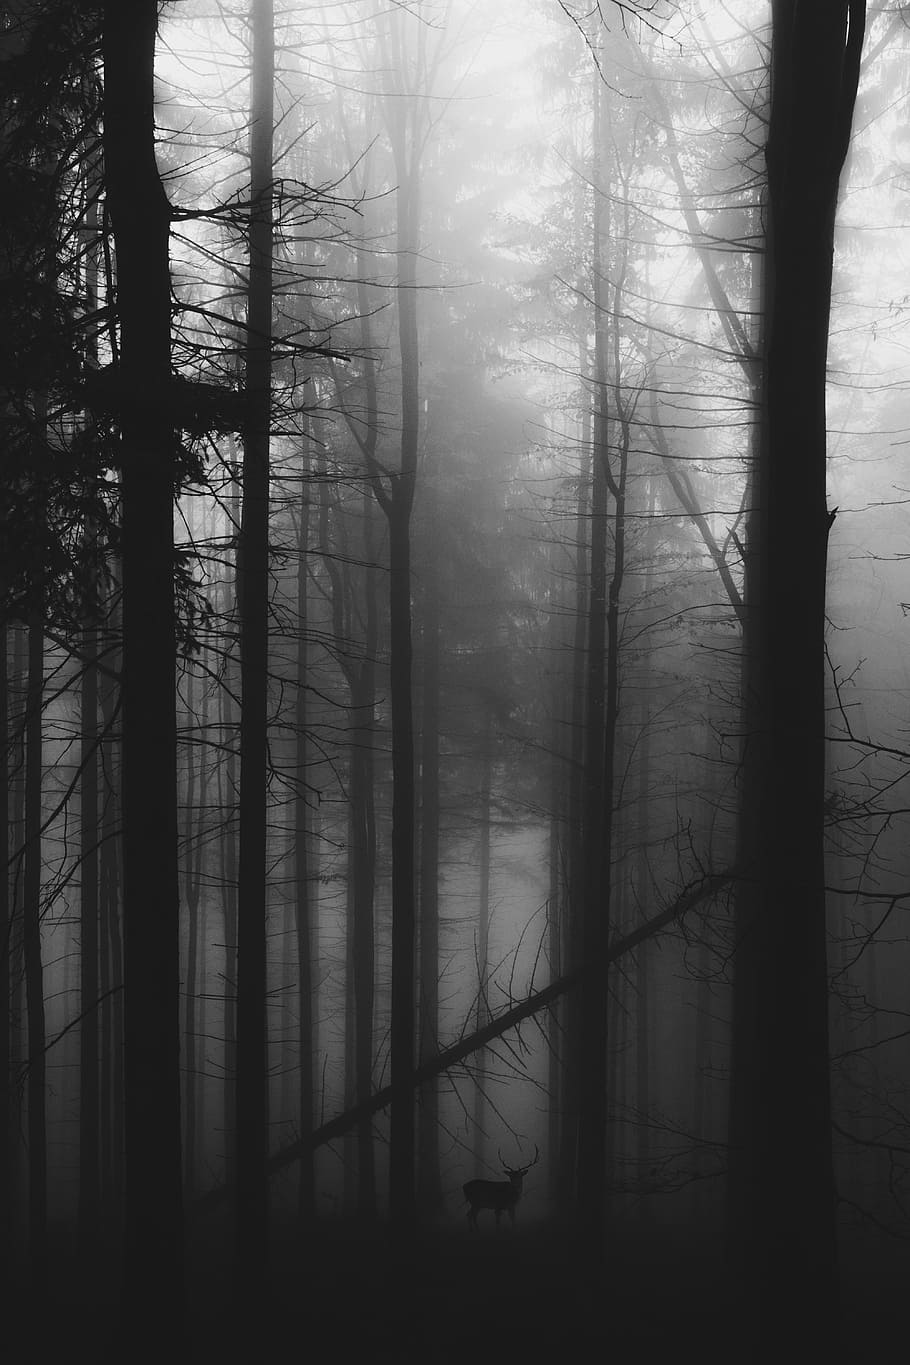 deer near tall trees covered with fogs, soul, explore, darm, darkness